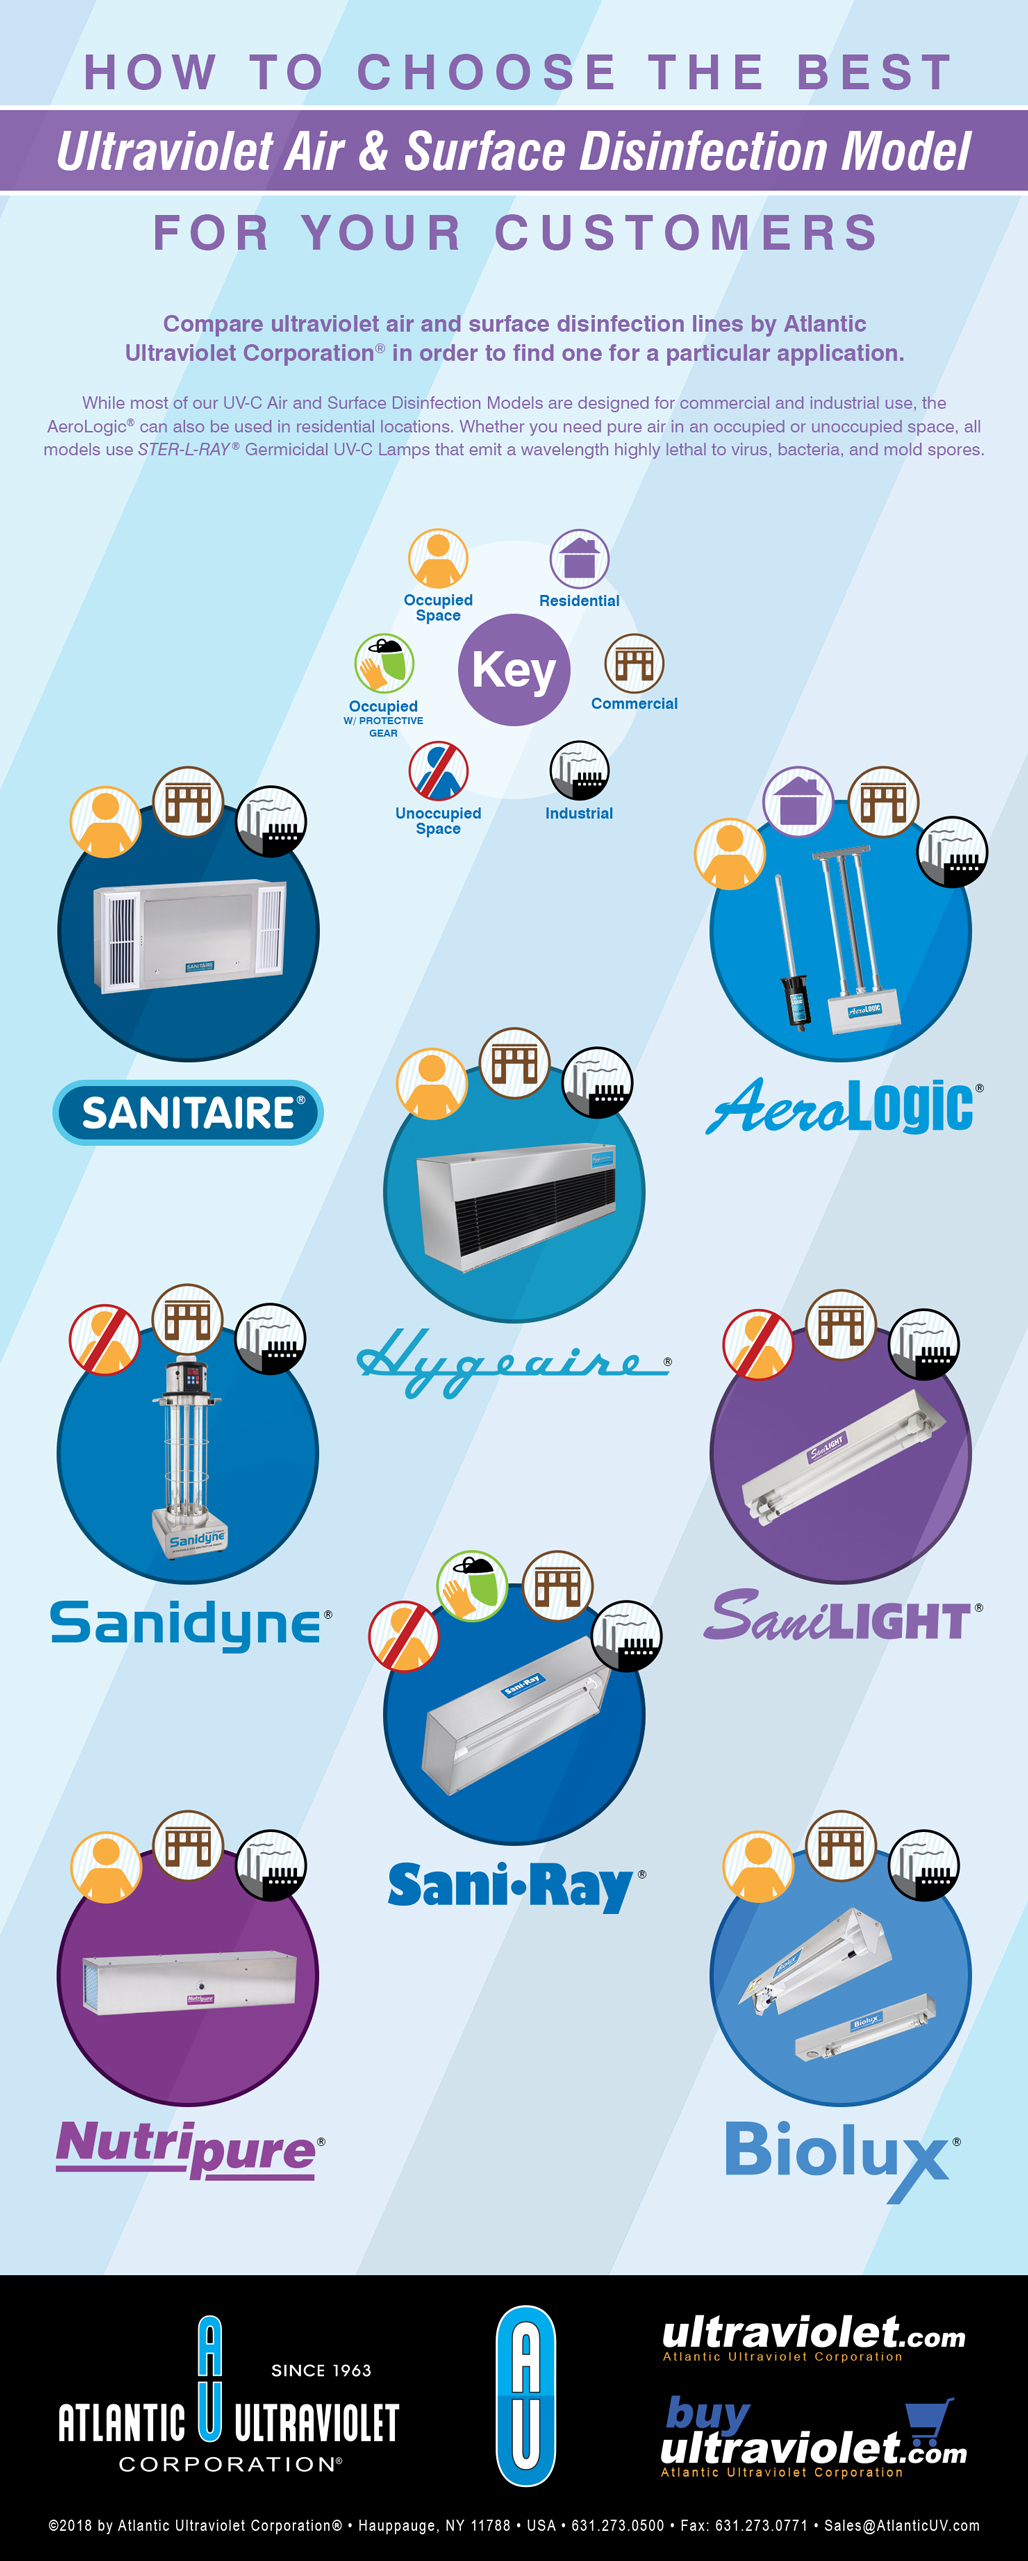 Compare Ultraviolet Air and Surface Disinfection for Your Customers - Infographic